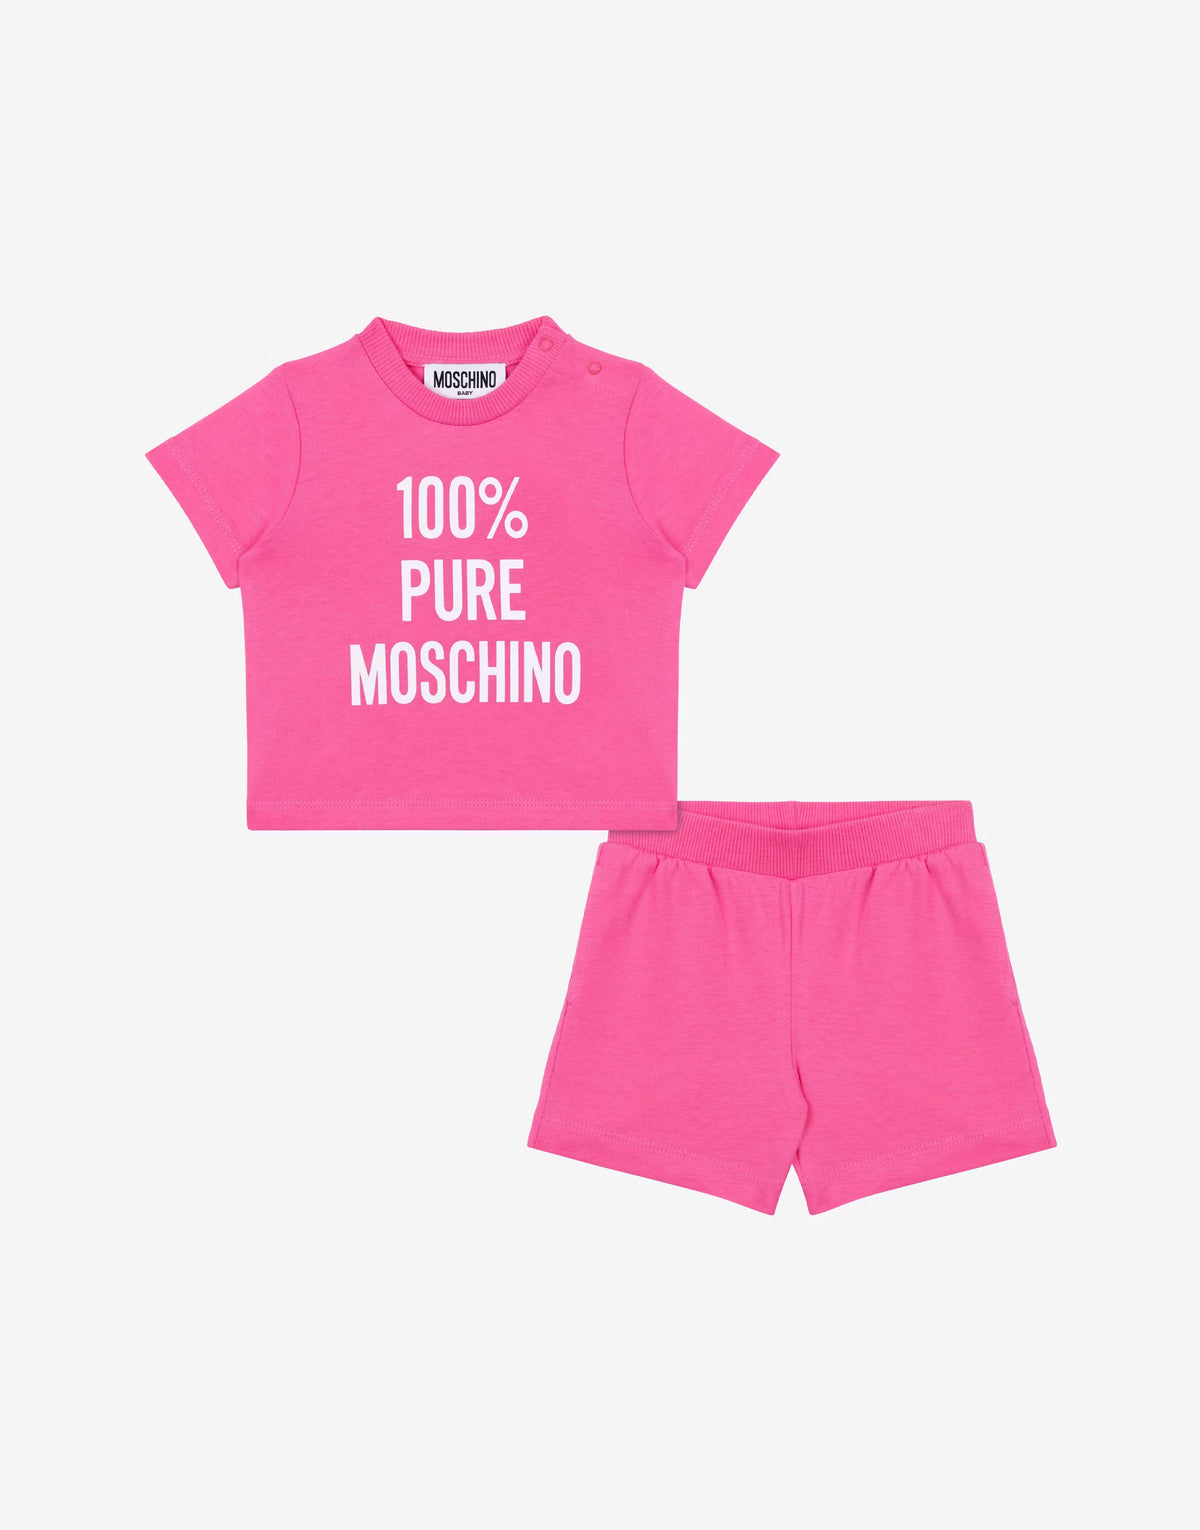 100% PURE MOSCHINO T-SHIRT AND SHORTS CO-ORD SET